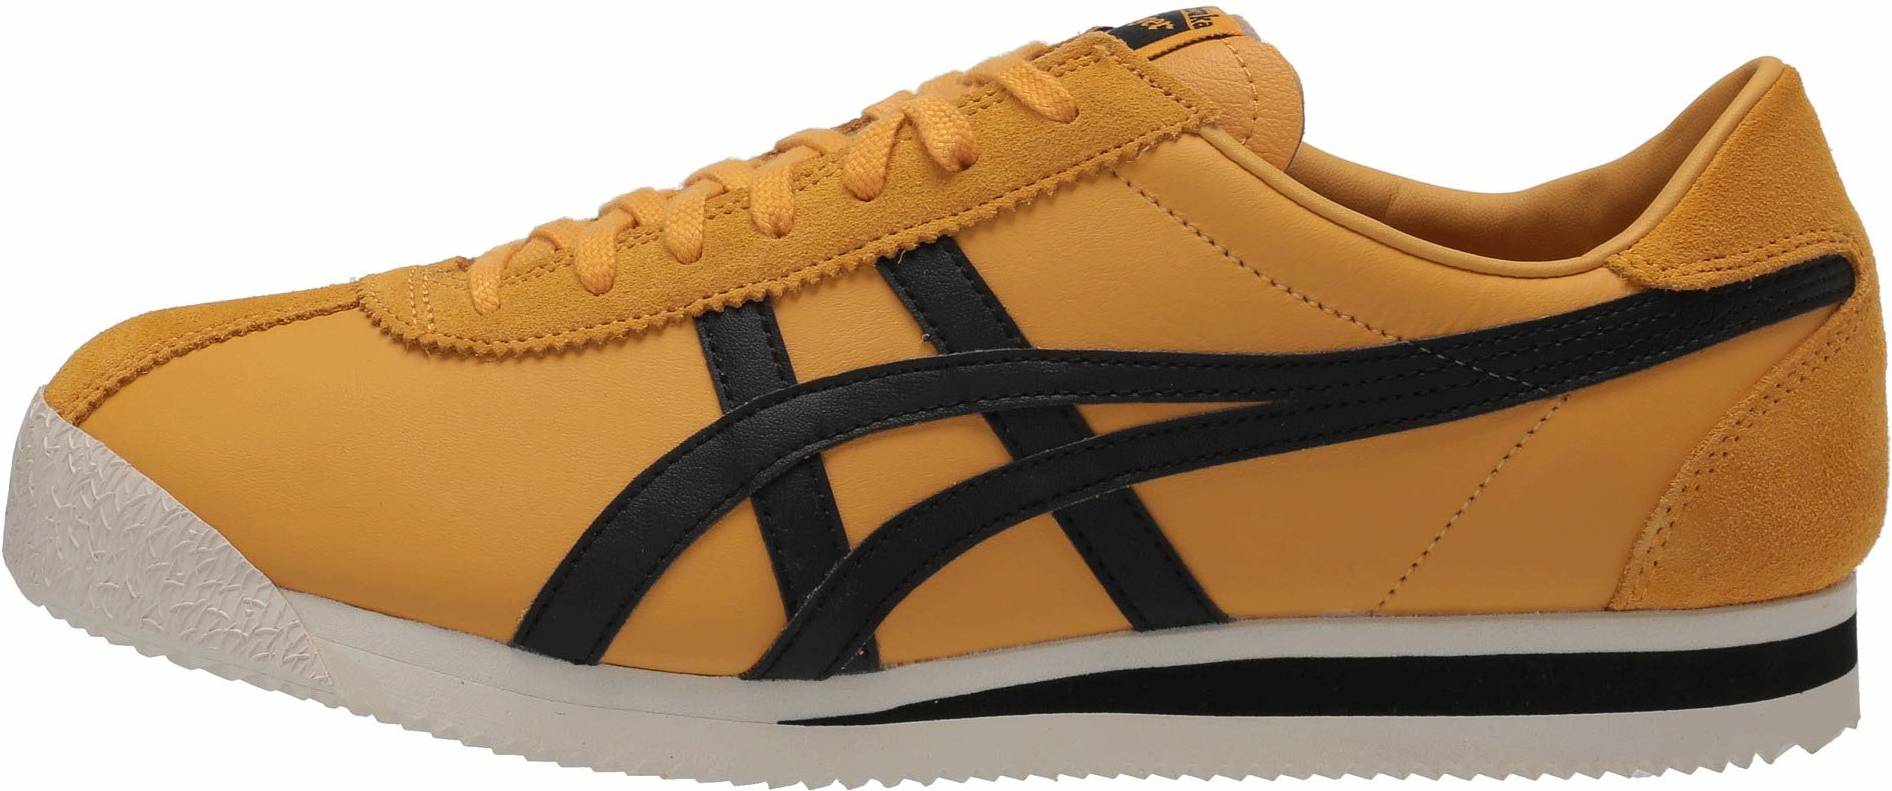 Save 49% on Onitsuka Tiger sneakers (28 